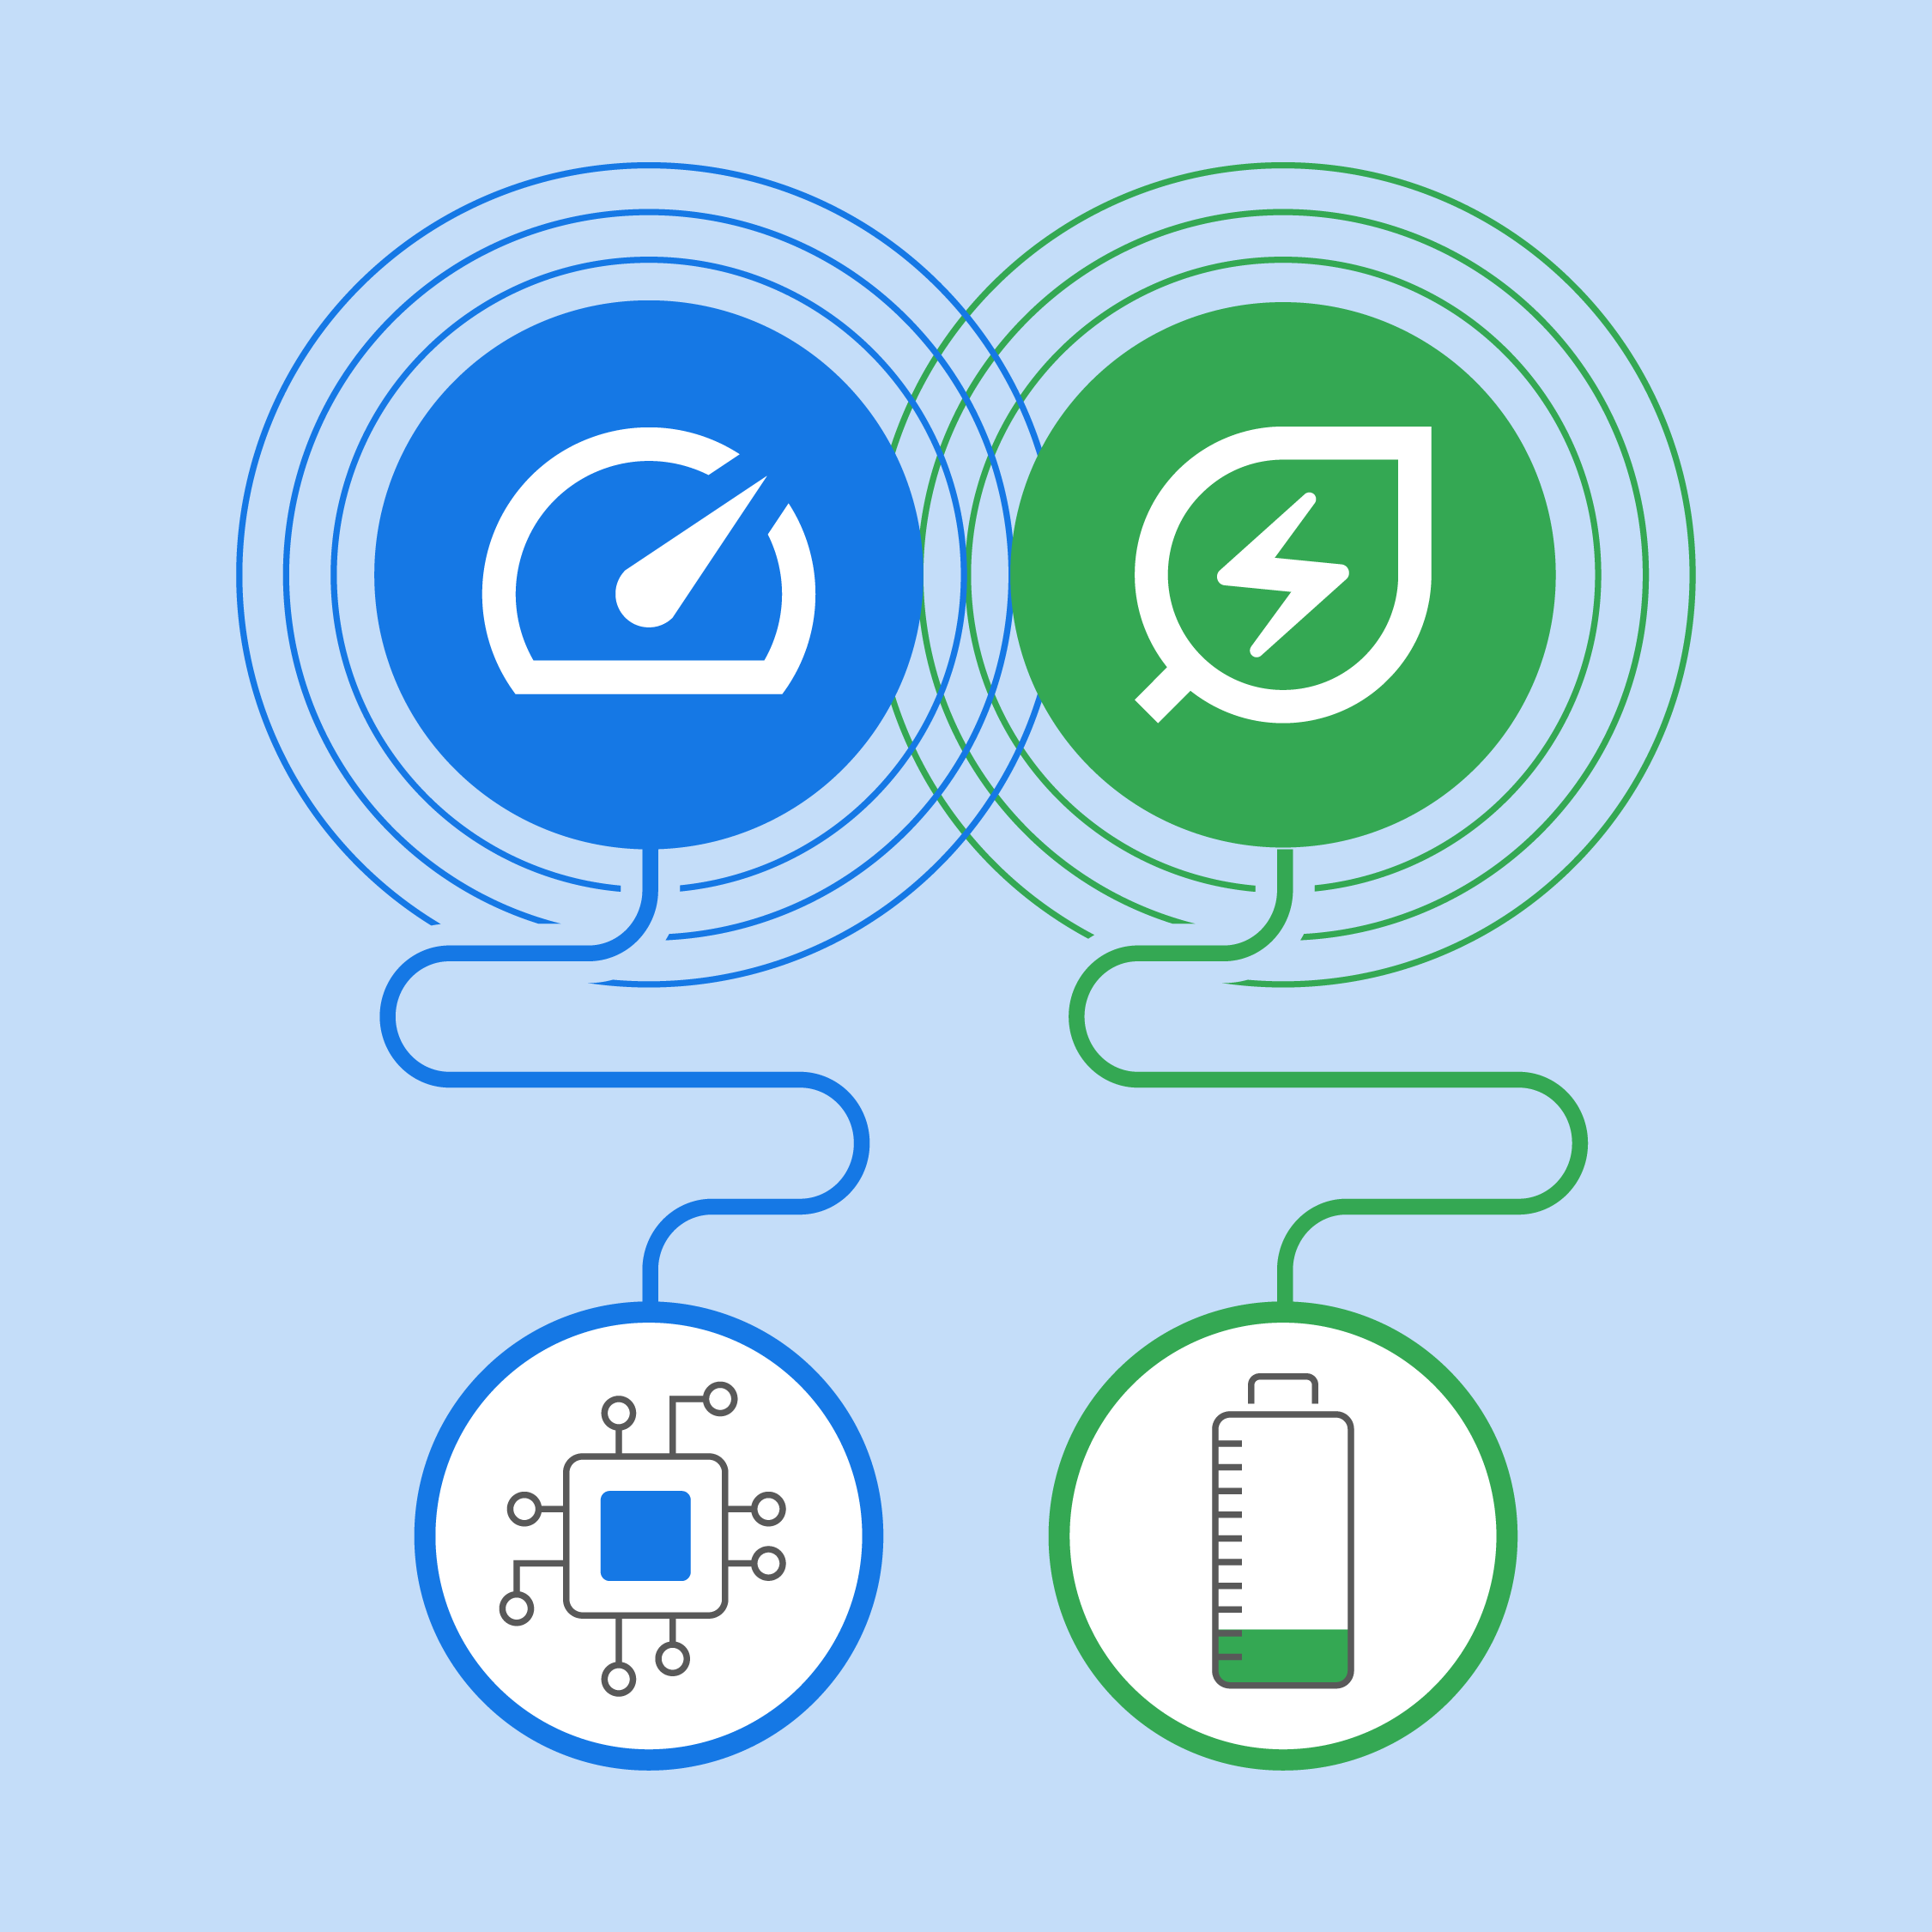 A curvy line connects a blue speedometer icon to a circle that symbolizes computer memory. To the right, a similar line connects a green electricity icon to a circle that represents battery power. 